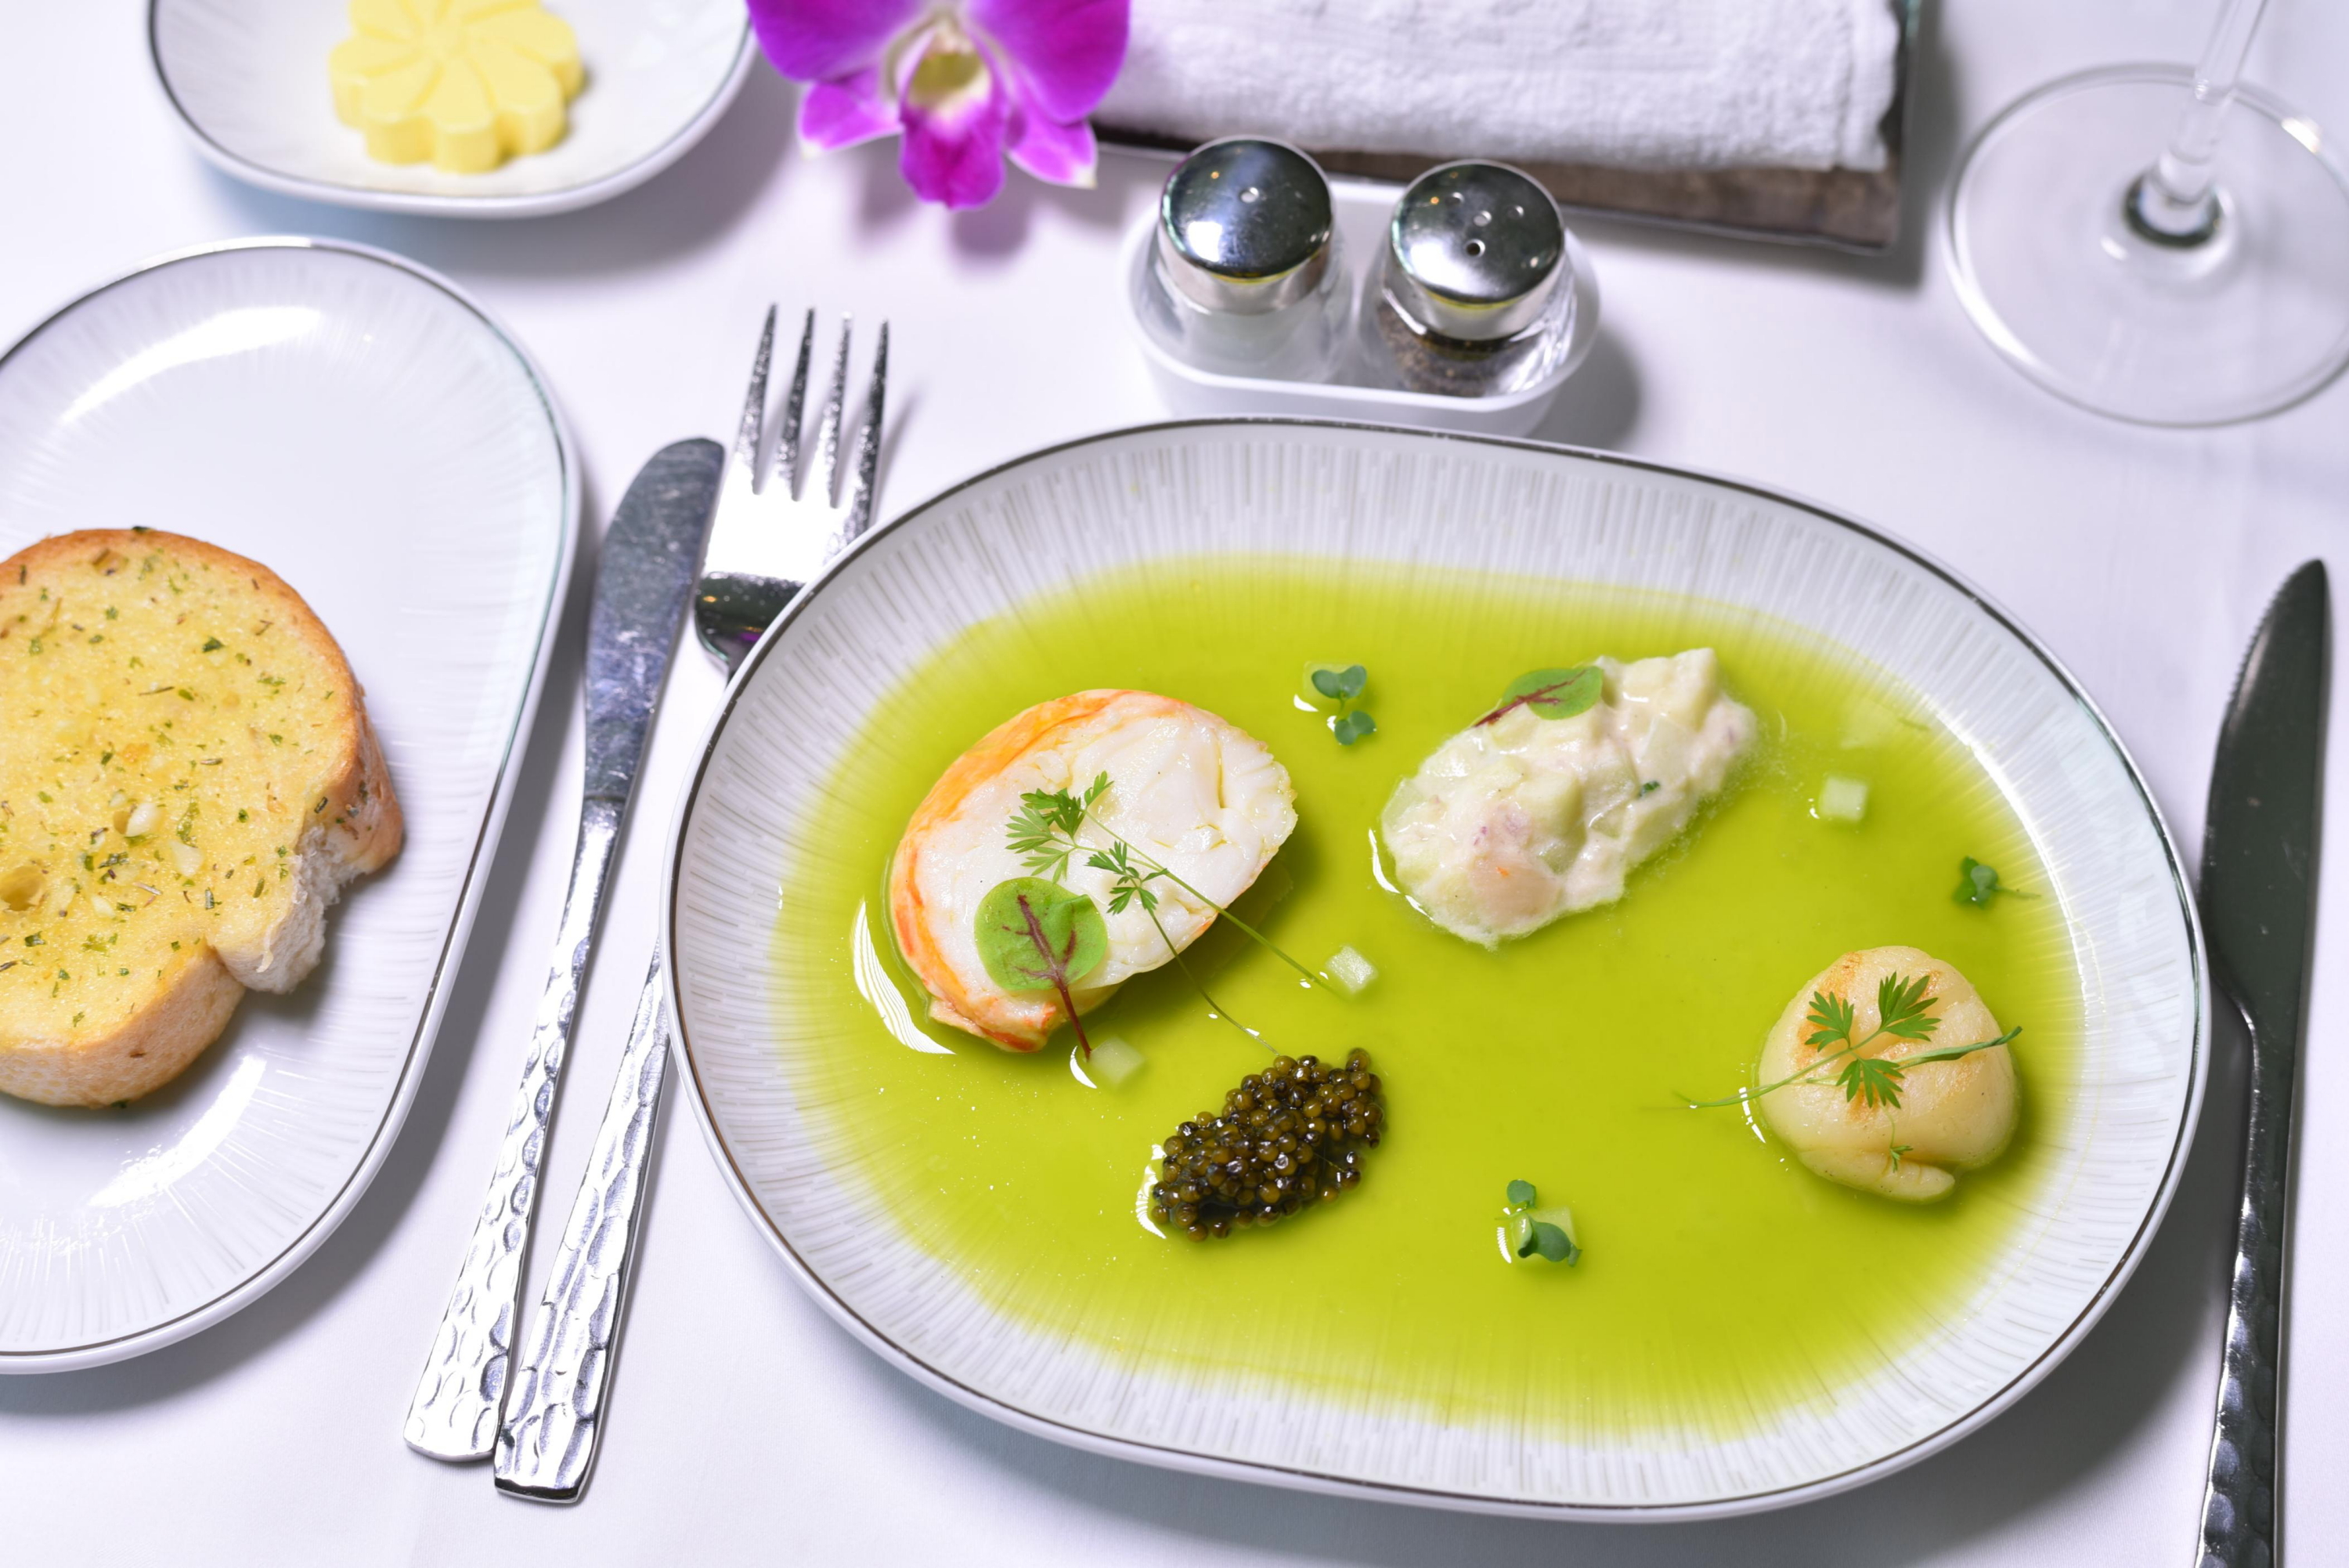 Thai Airways: Caviar, Scallop and Lobster with Green Jelly and a Shallot Cream. Click to enlarge.